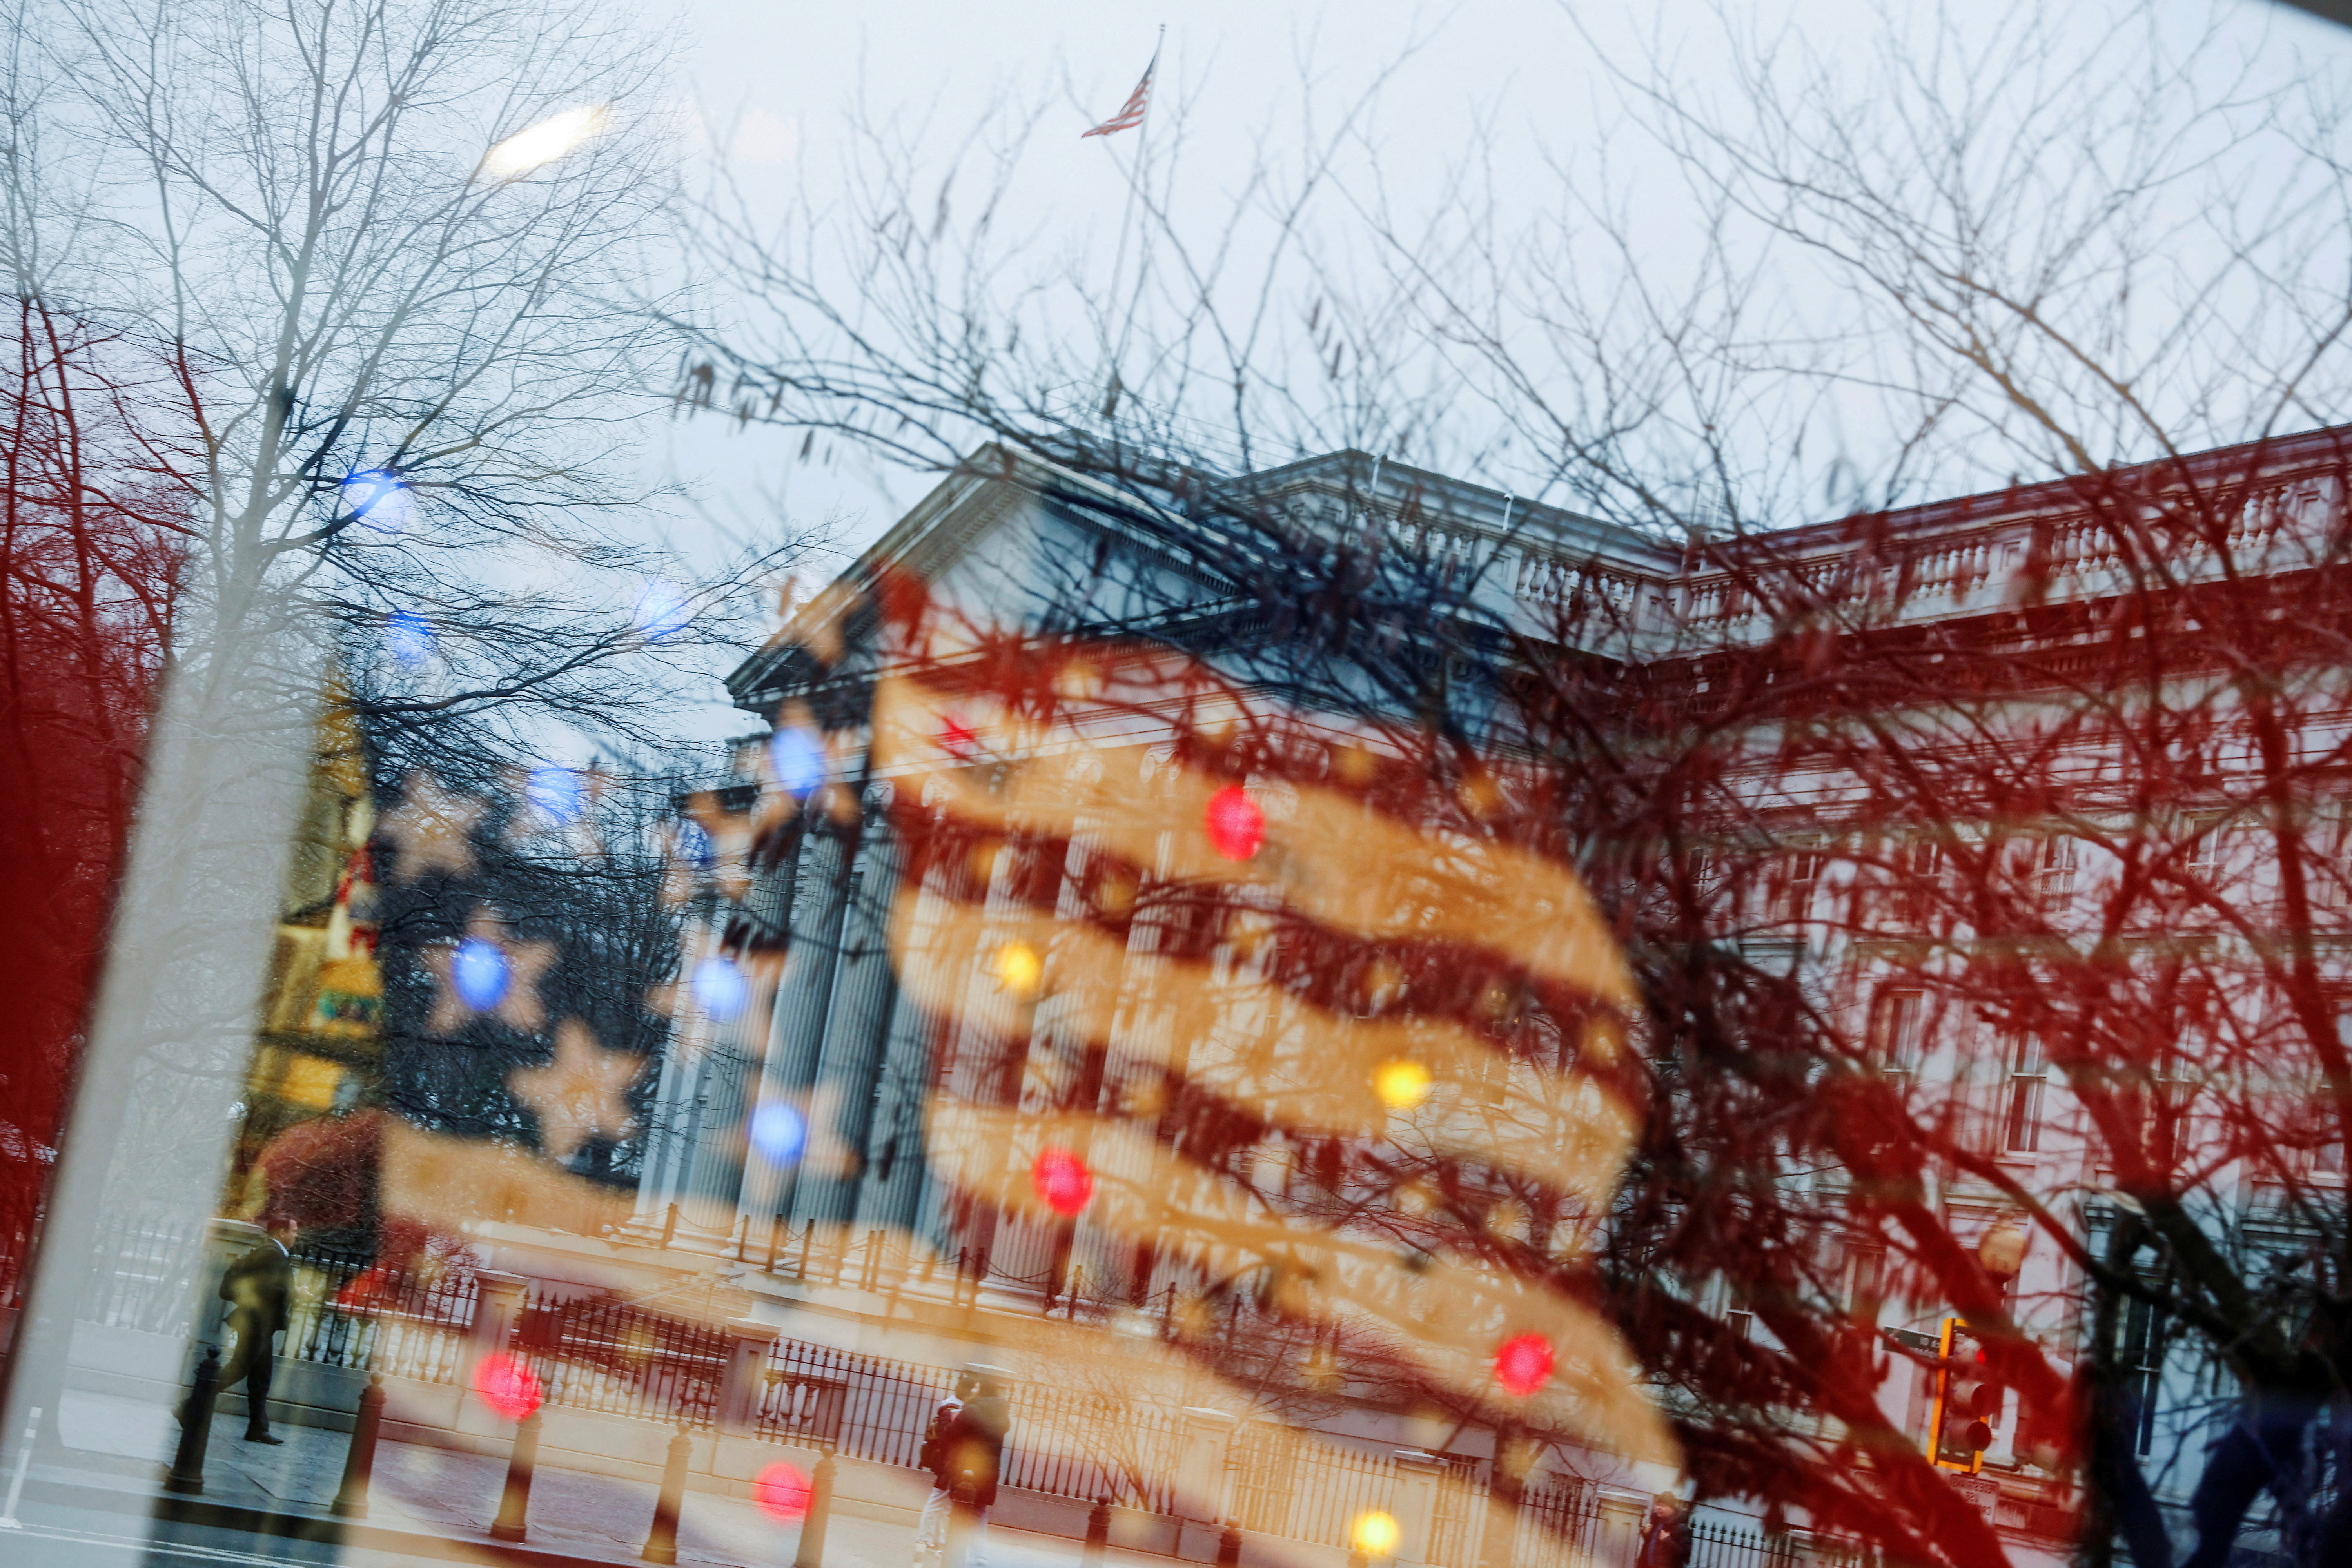 The U.S. Treasury building is seen reflected in the window of a souvenir shop in Washington